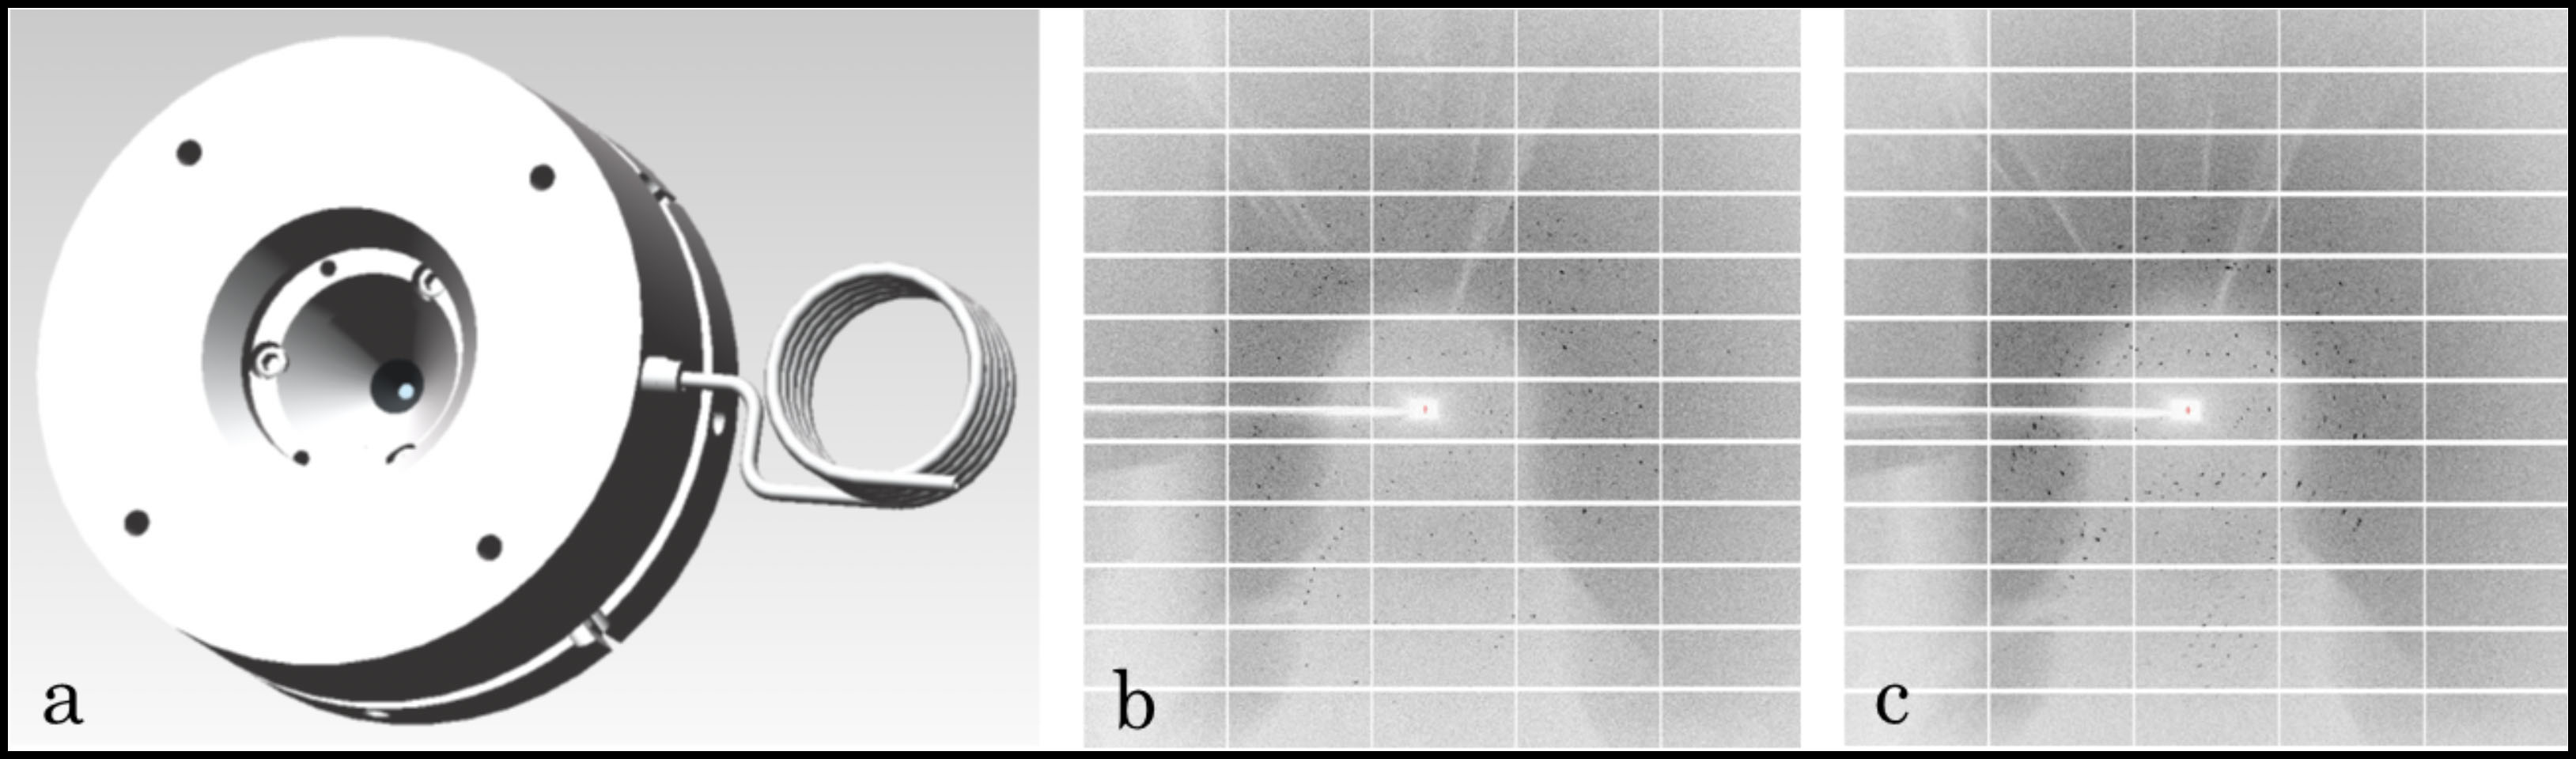 anvil cell and diffraction images